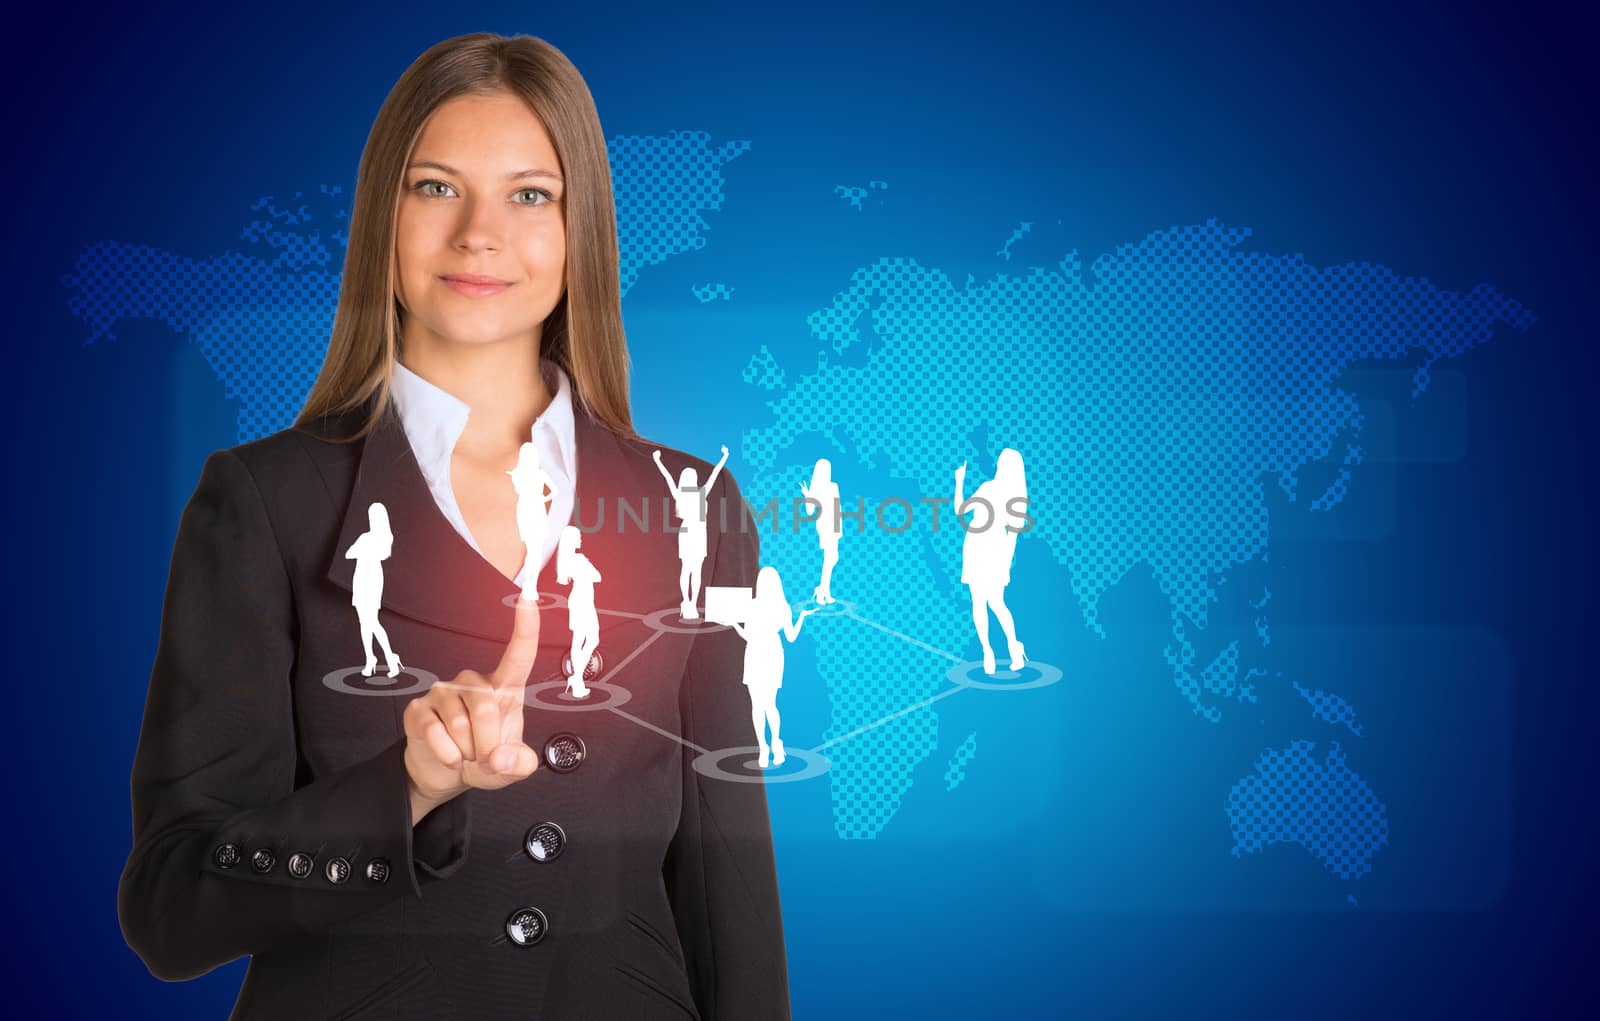 Beautiful businesswoman in suit presses finger on virtual button. World map and business silhouettes by cherezoff